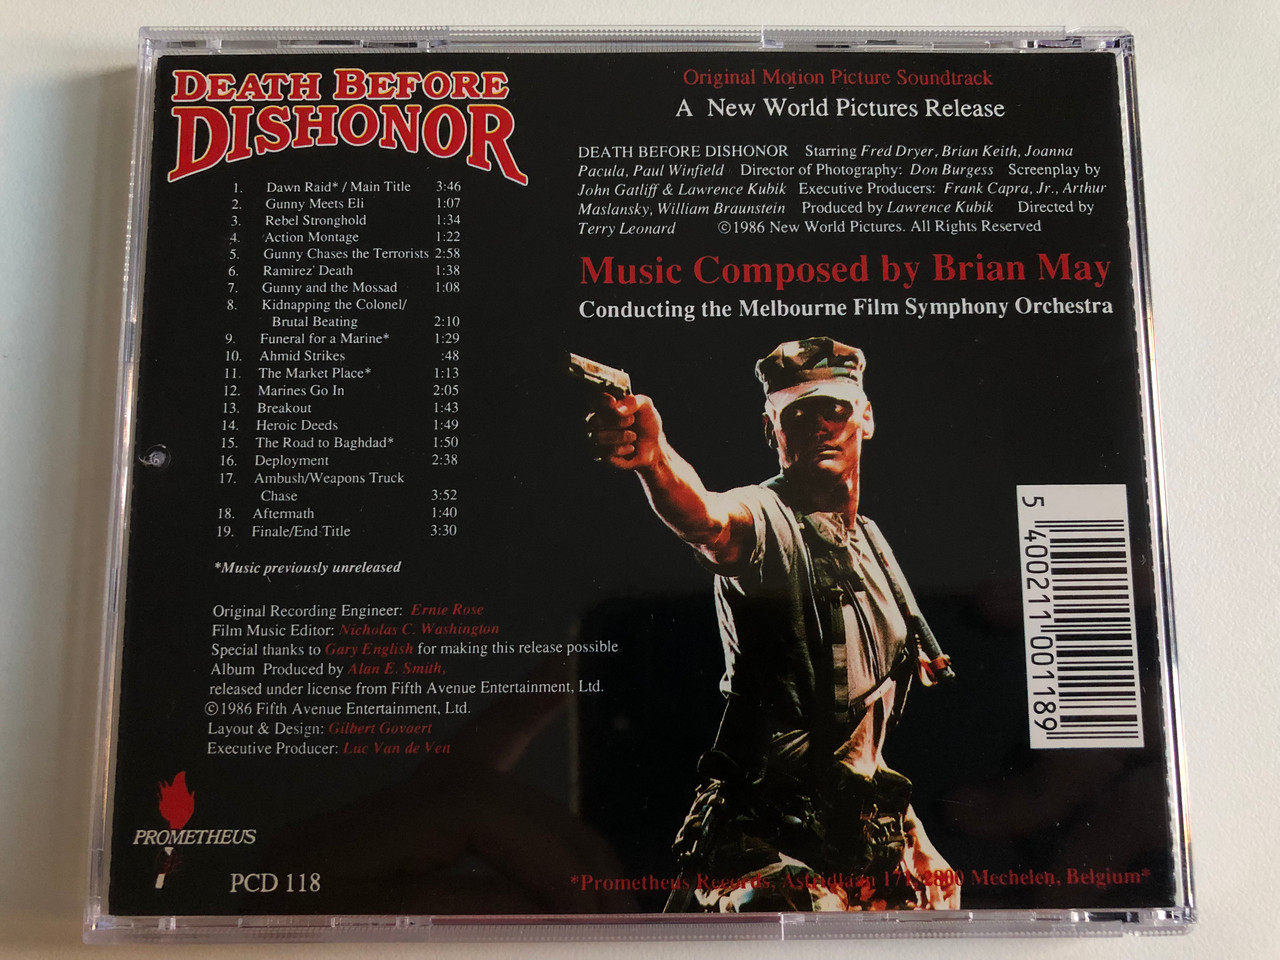 https://cdn10.bigcommerce.com/s-62bdpkt7pb/products/0/images/197499/Death_Before_Dishonor_Original_Motion_Picture_Soundtrack_-_Music_Composed_by_Brian_May_Conducting_the_Melbouurne_Film_Symphony_Orchestra_By_The_composer_of_Mad_Max_I_and_II_Prometheus_4__66076.1635496826.1280.1280.JPG?c=2&_gl=1*7yssgo*_ga*MjA2NTIxMjE2MC4xNTkwNTEyNTMy*_ga_WS2VZYPC6G*MTYzNTQ5NjQyMS4xNDYuMS4xNjM1NDk2NDUwLjMx